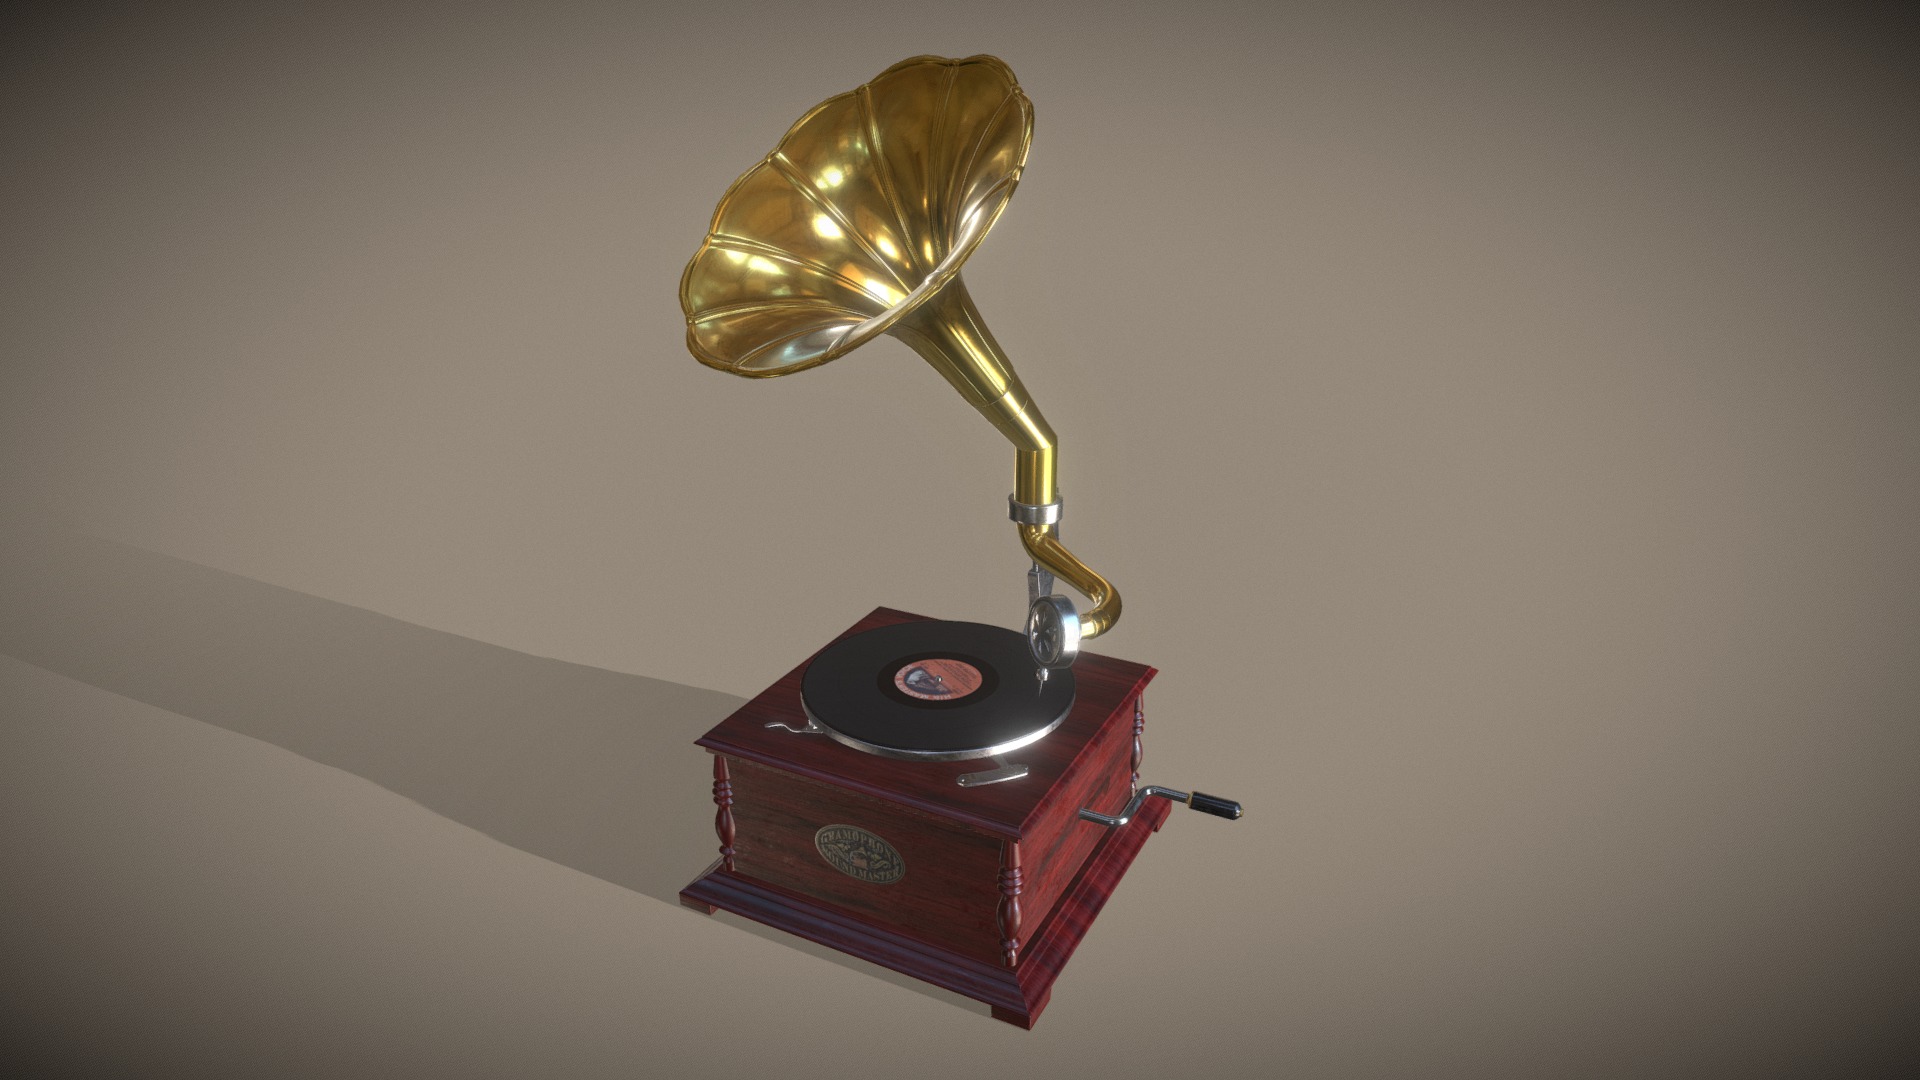 3D model Gramophone - This is a 3D model of the Gramophone. The 3D model is about a gold and silver trophy on a red box.